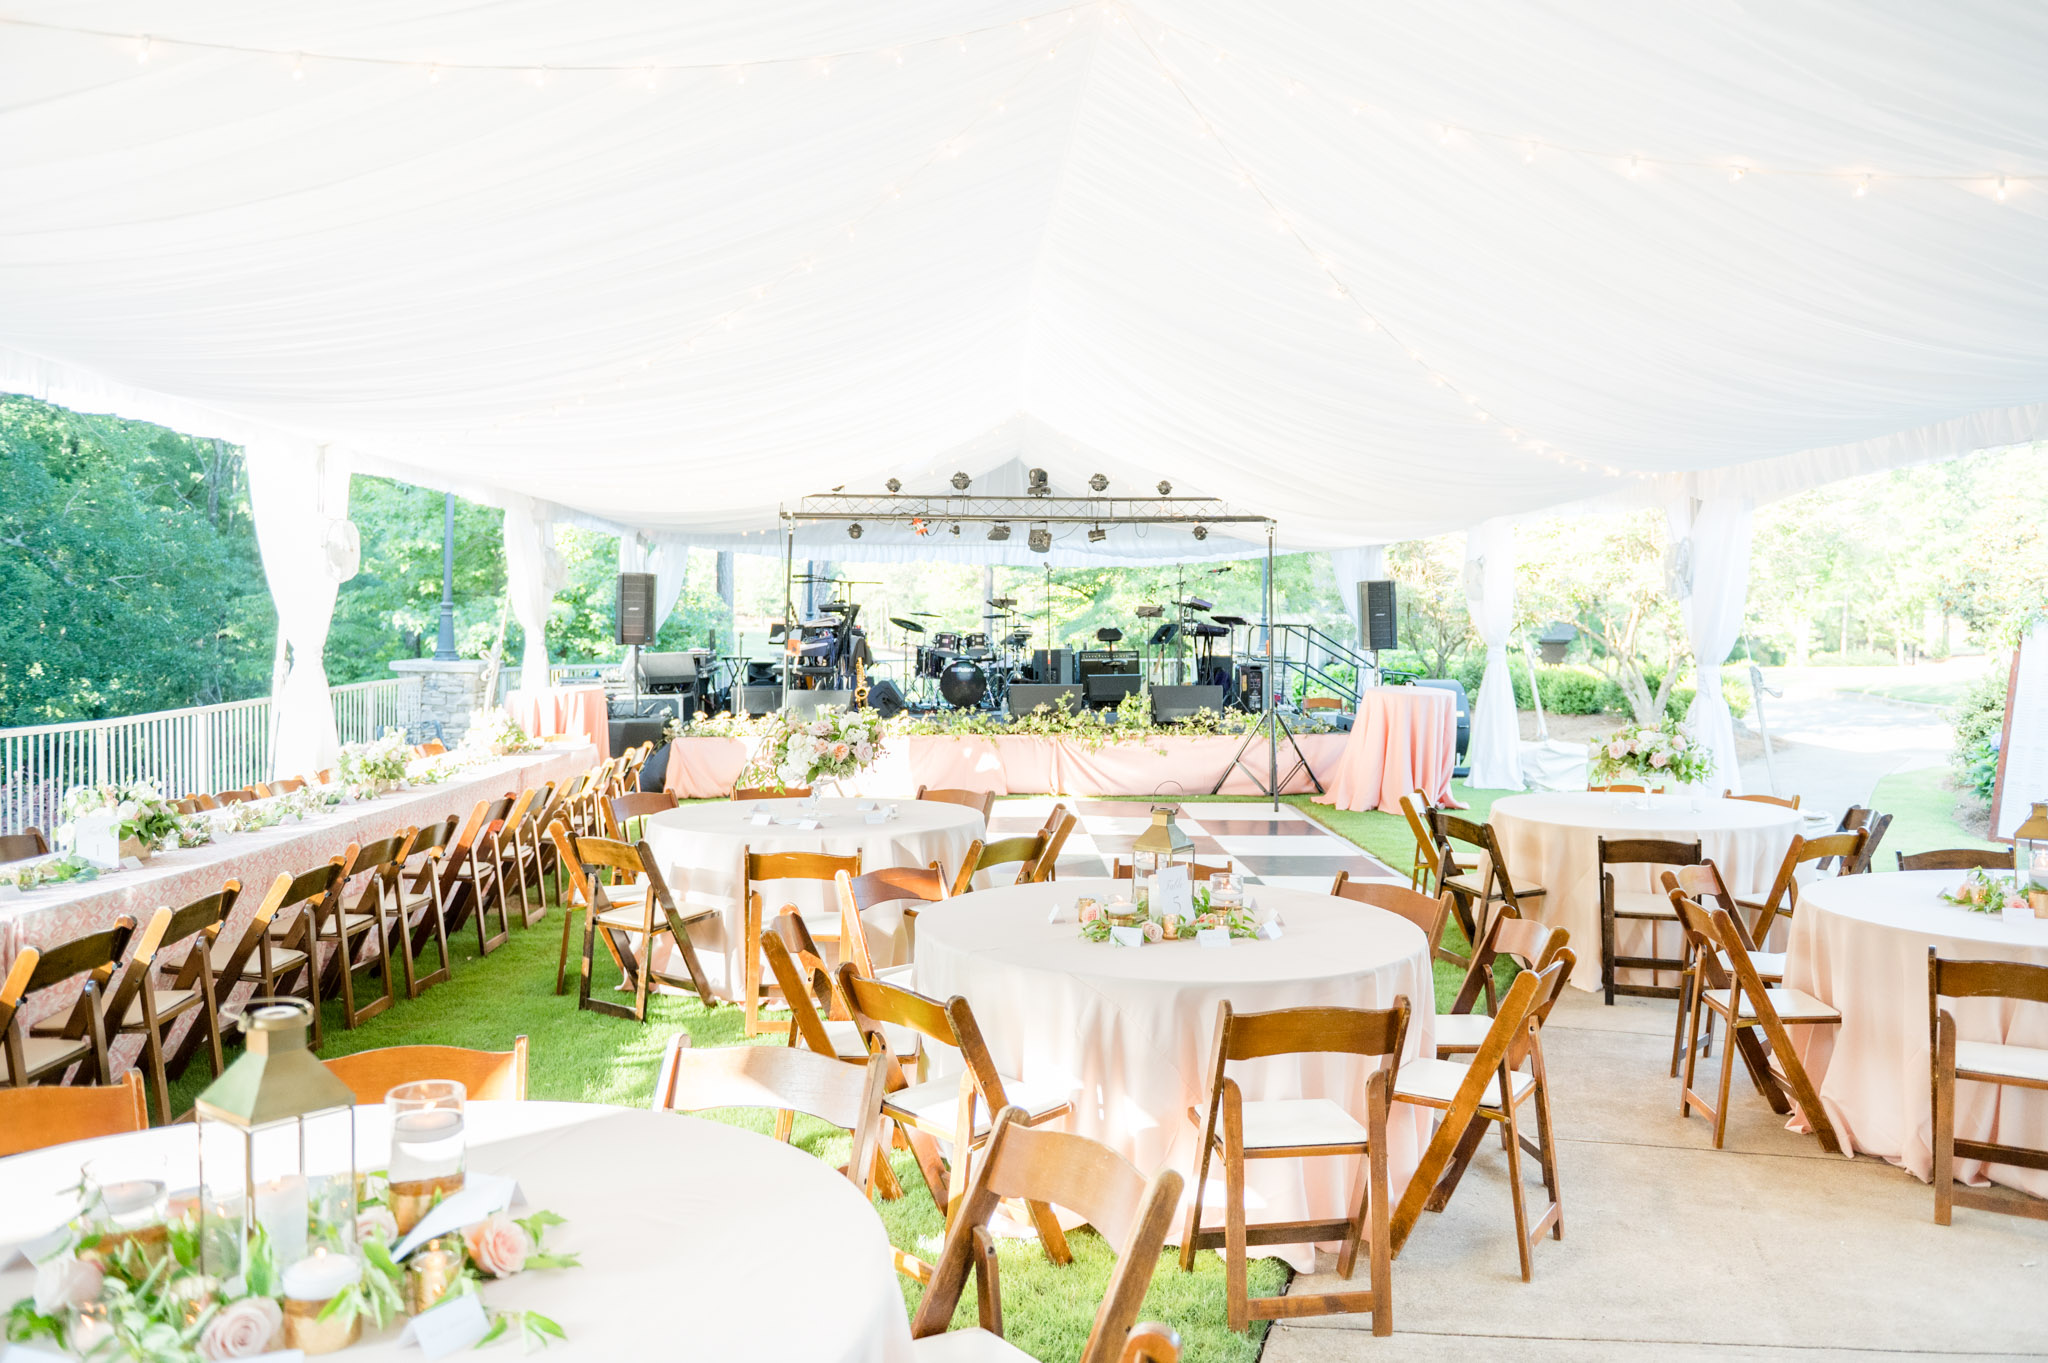 Wedding reception tent with blush and white details.